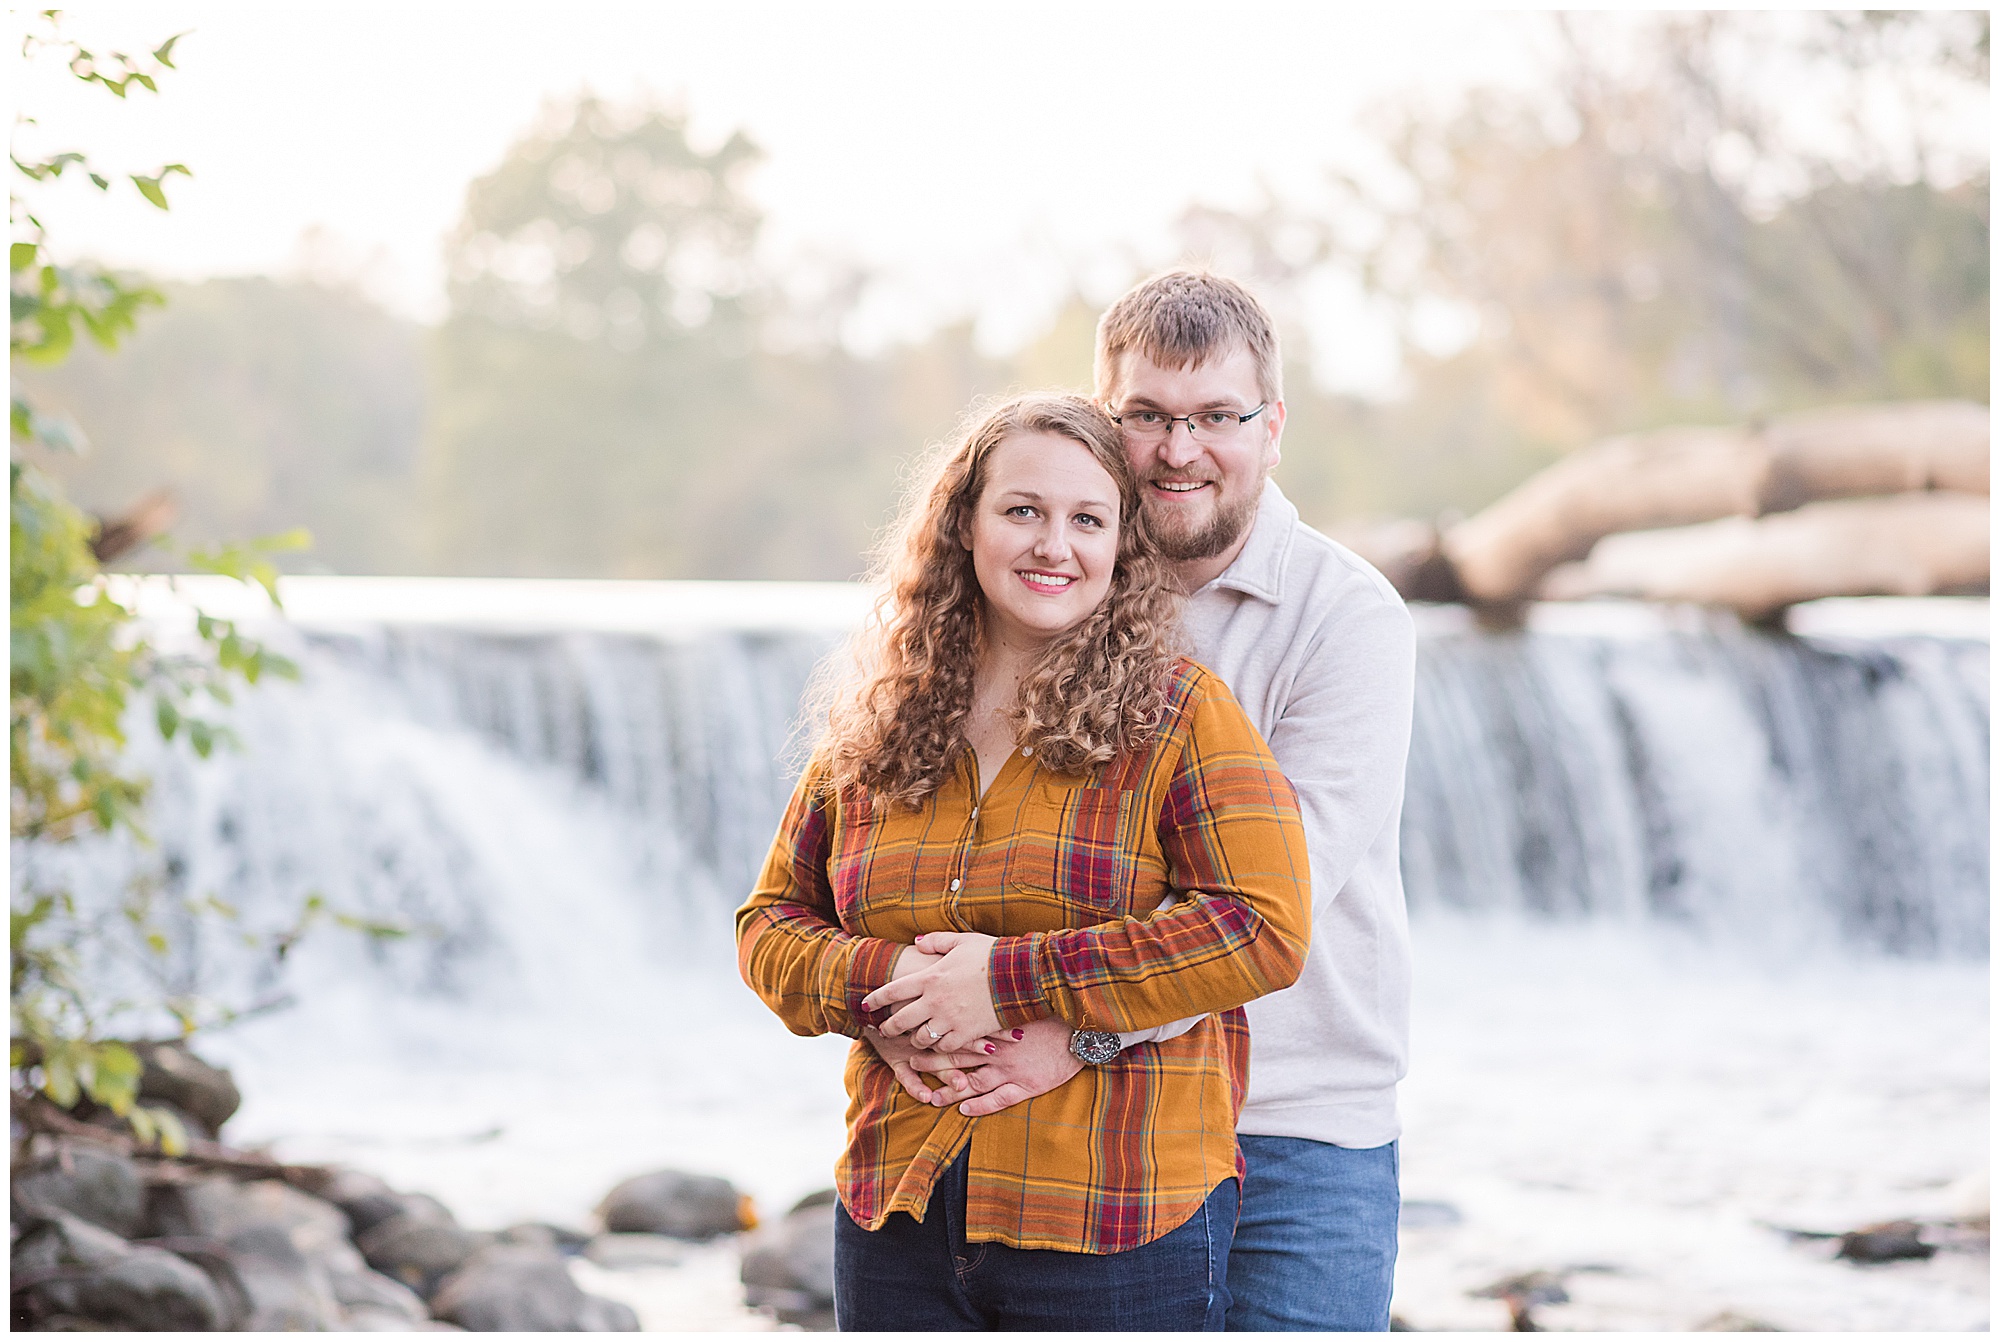 Waterfall Engagement Session at Fullersburg Woods